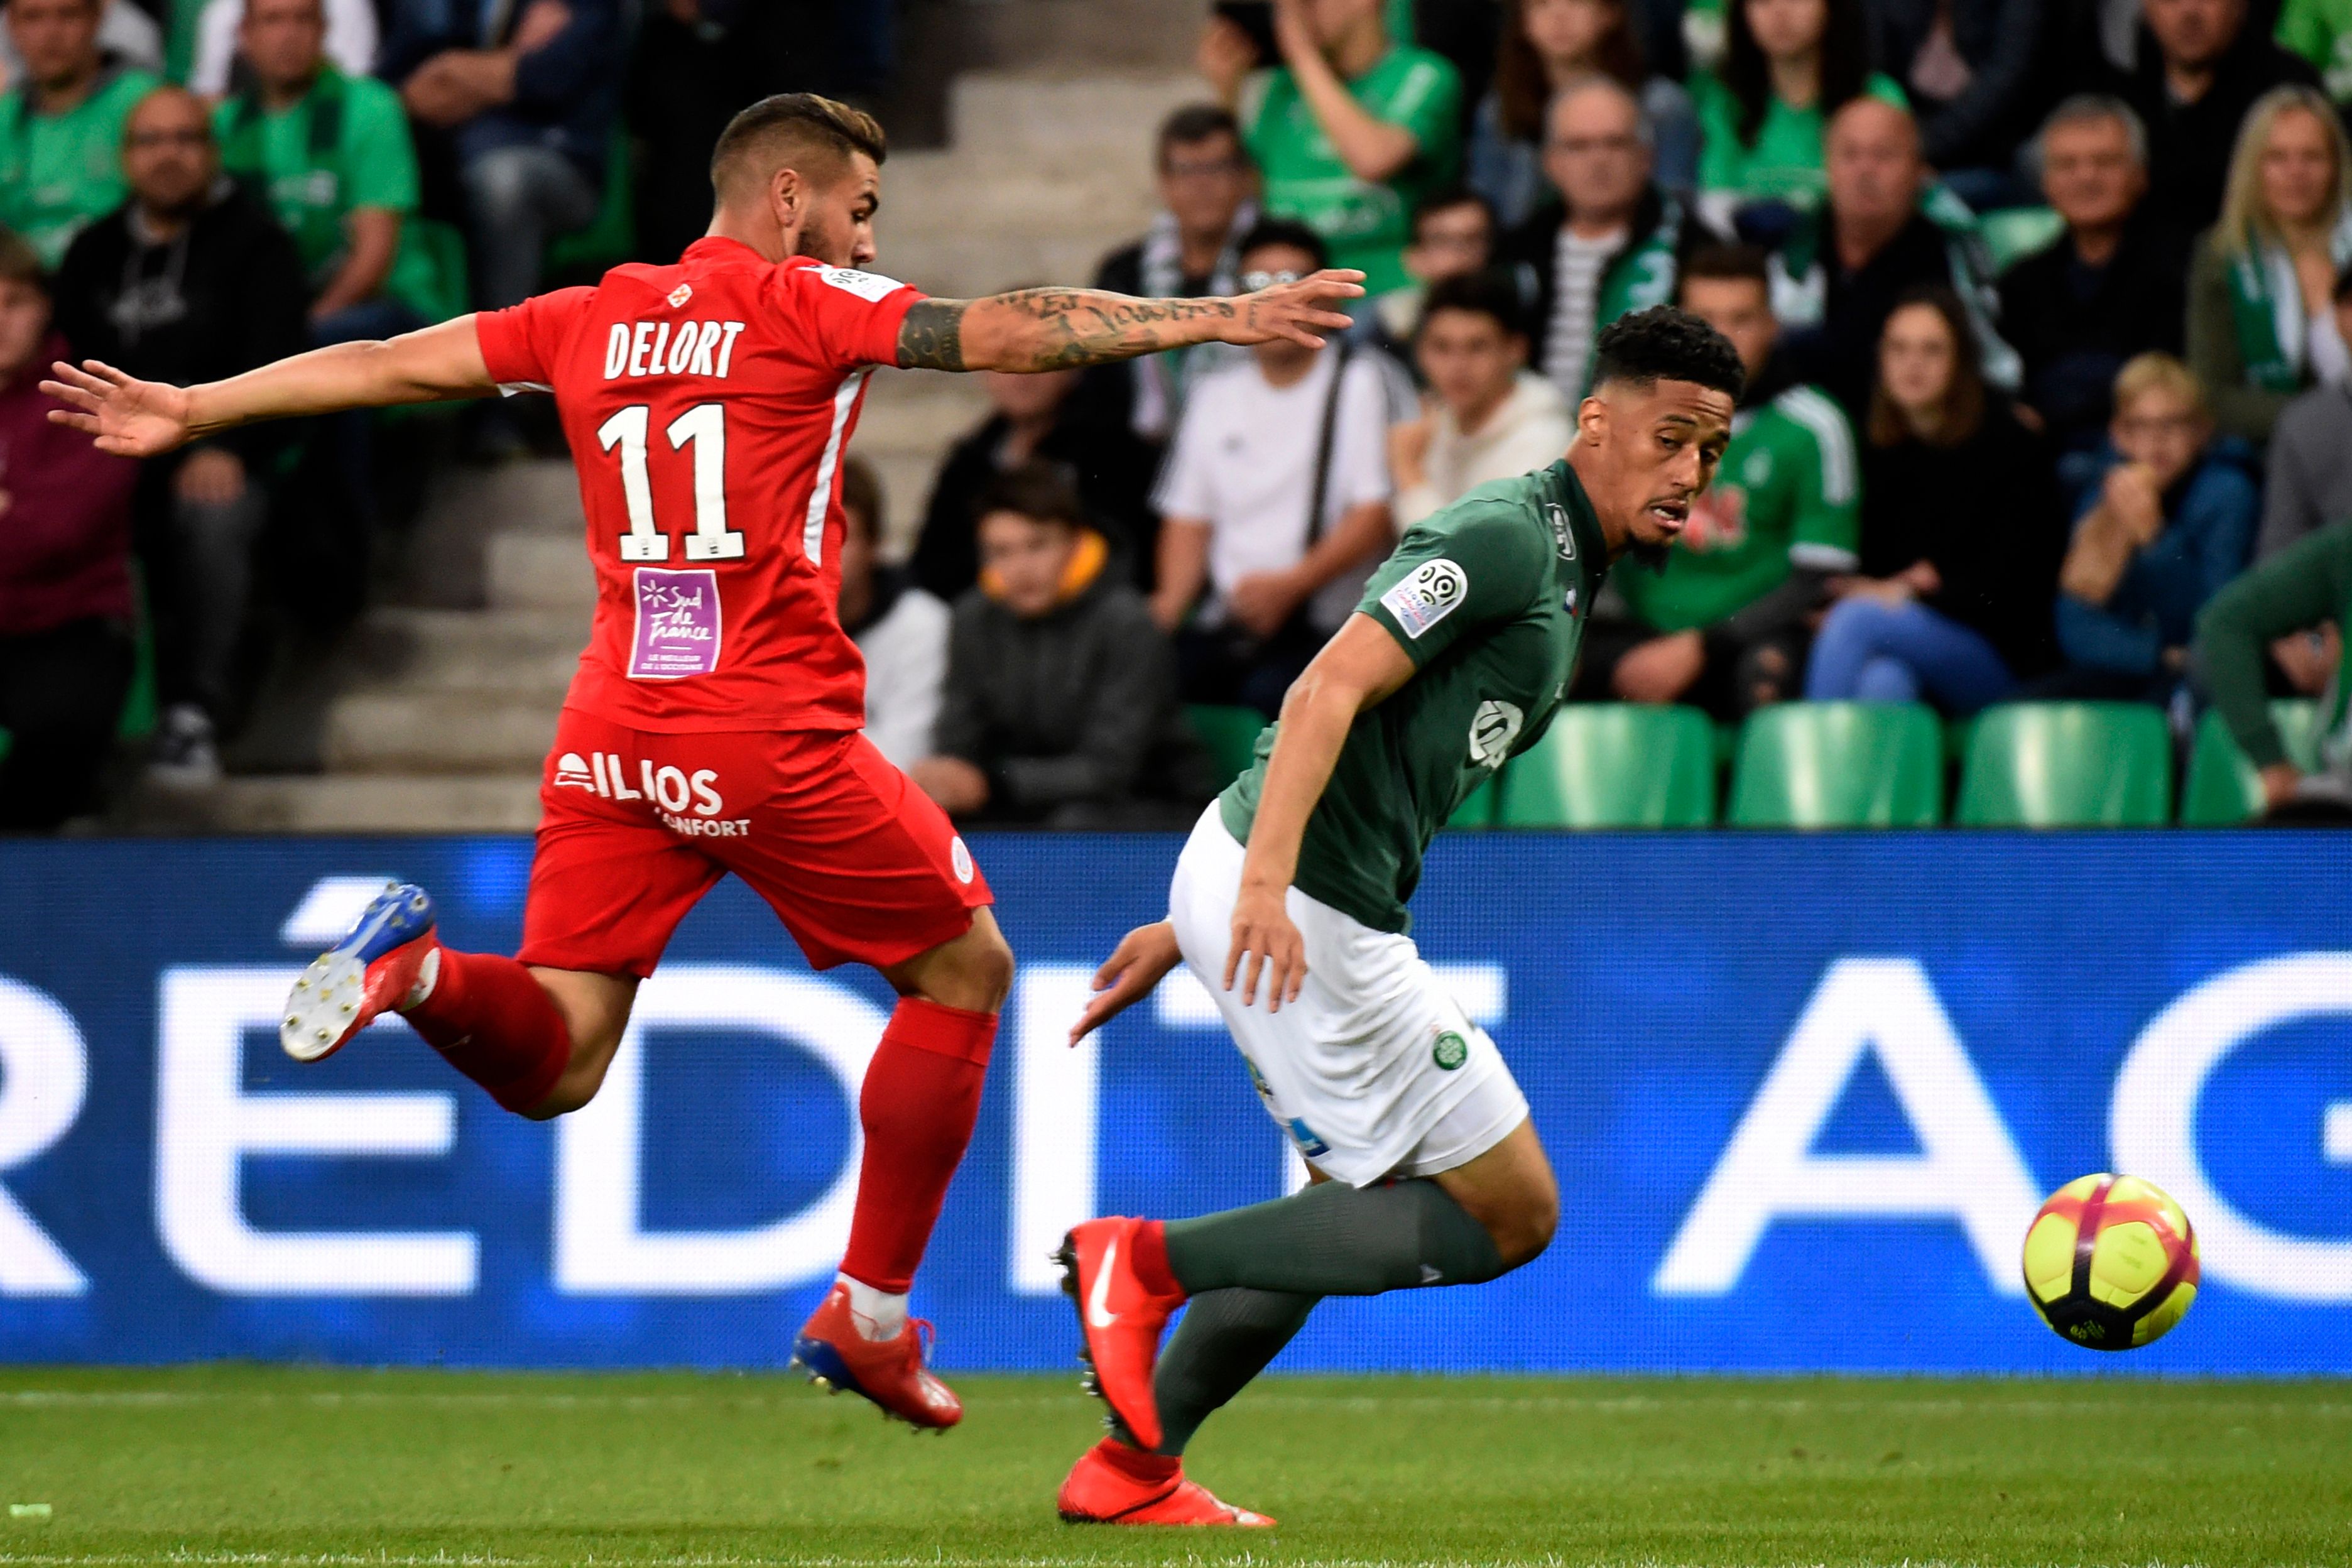 Montpellier's French forward Andy Delfort (L) vies with Saint-Etienne's French forward William Saliba (R) during the French L1 football match between Saint-Etienne (ASSE) and Montpellier (MHSC) on May 10, 2019, at the Geoffroy Guichard Stadium in Saint-Etienne, central France. (Photo by JEAN-PHILIPPE KSIAZEK / AFP)        (Photo credit should read JEAN-PHILIPPE KSIAZEK/AFP/Getty Images)